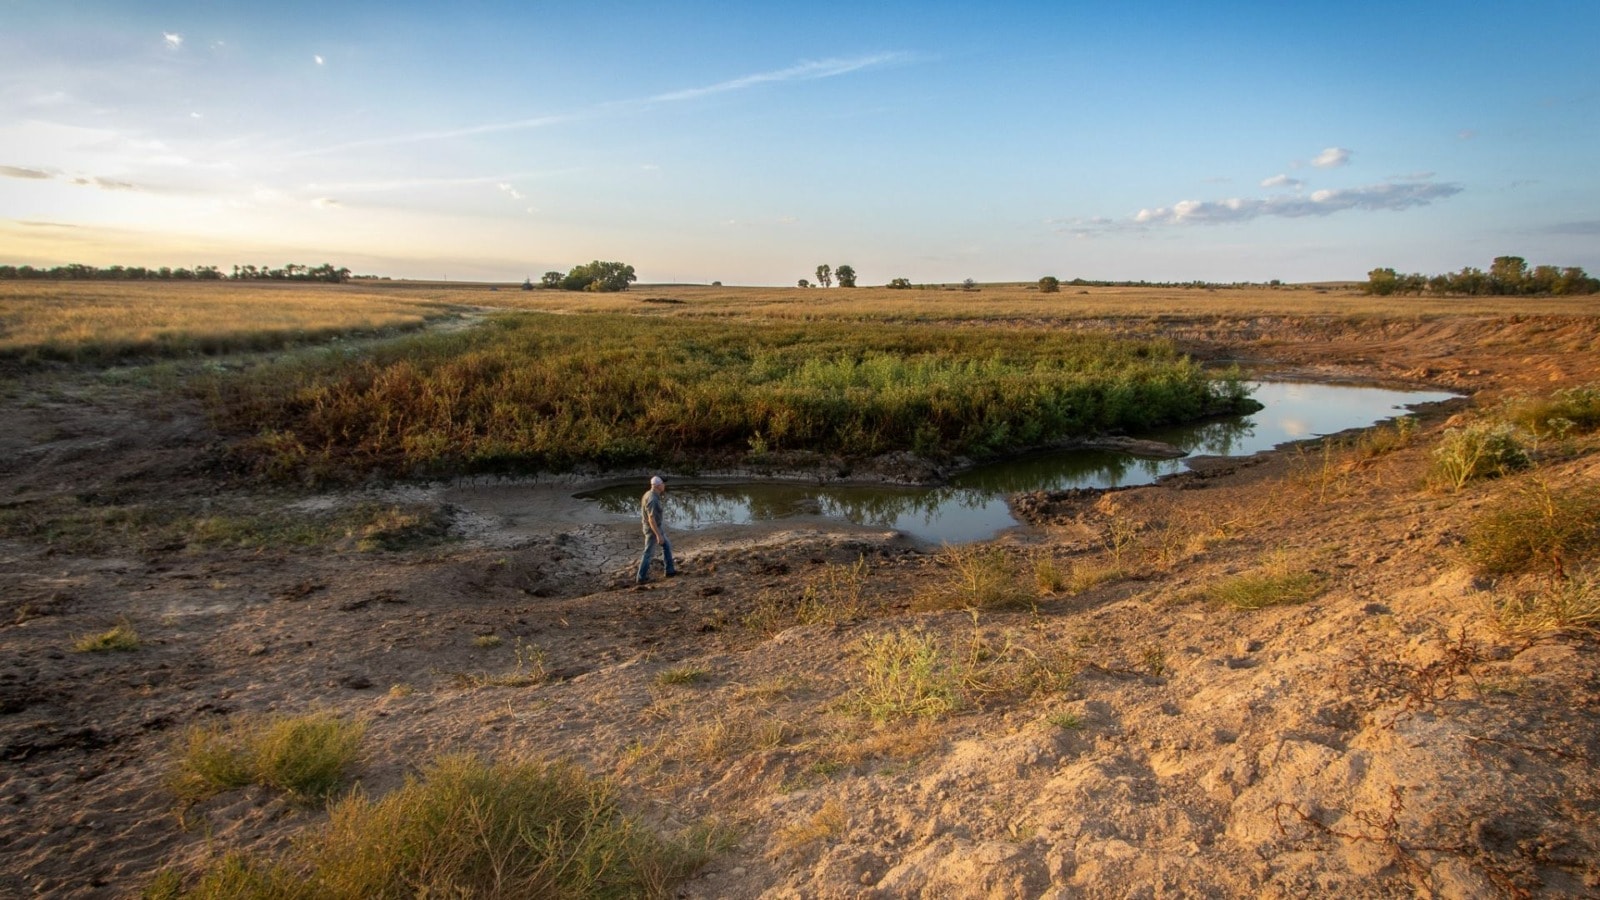 Bruce Graham inspects an almost dry pond on his farm.